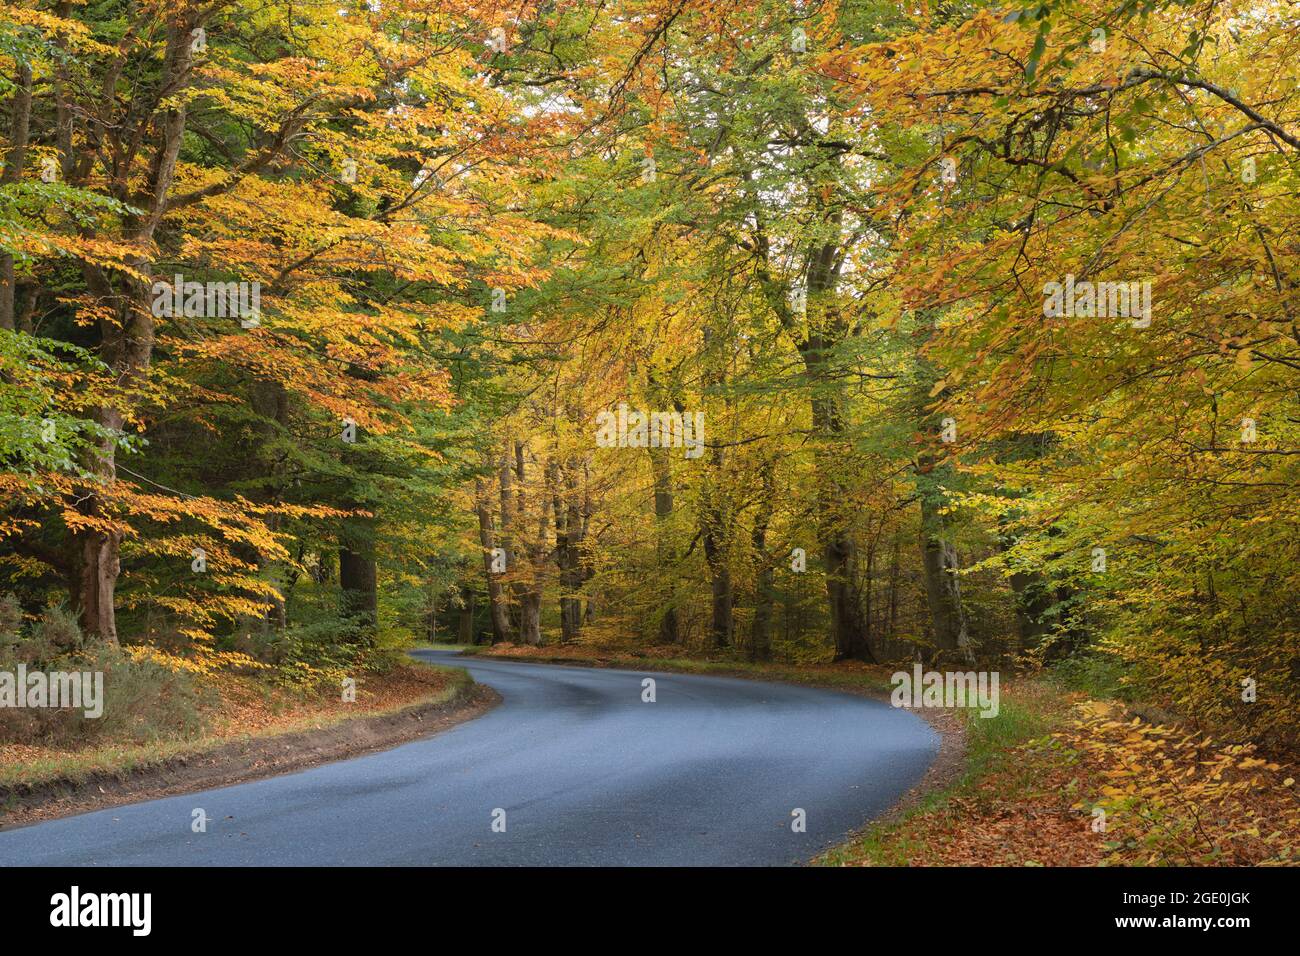 A Country Road in Aberdeenshire, Scotland, Winding Through a Beech Wood (Fagus Sylvatica) with Colourful Autumn Foliage Stock Photo